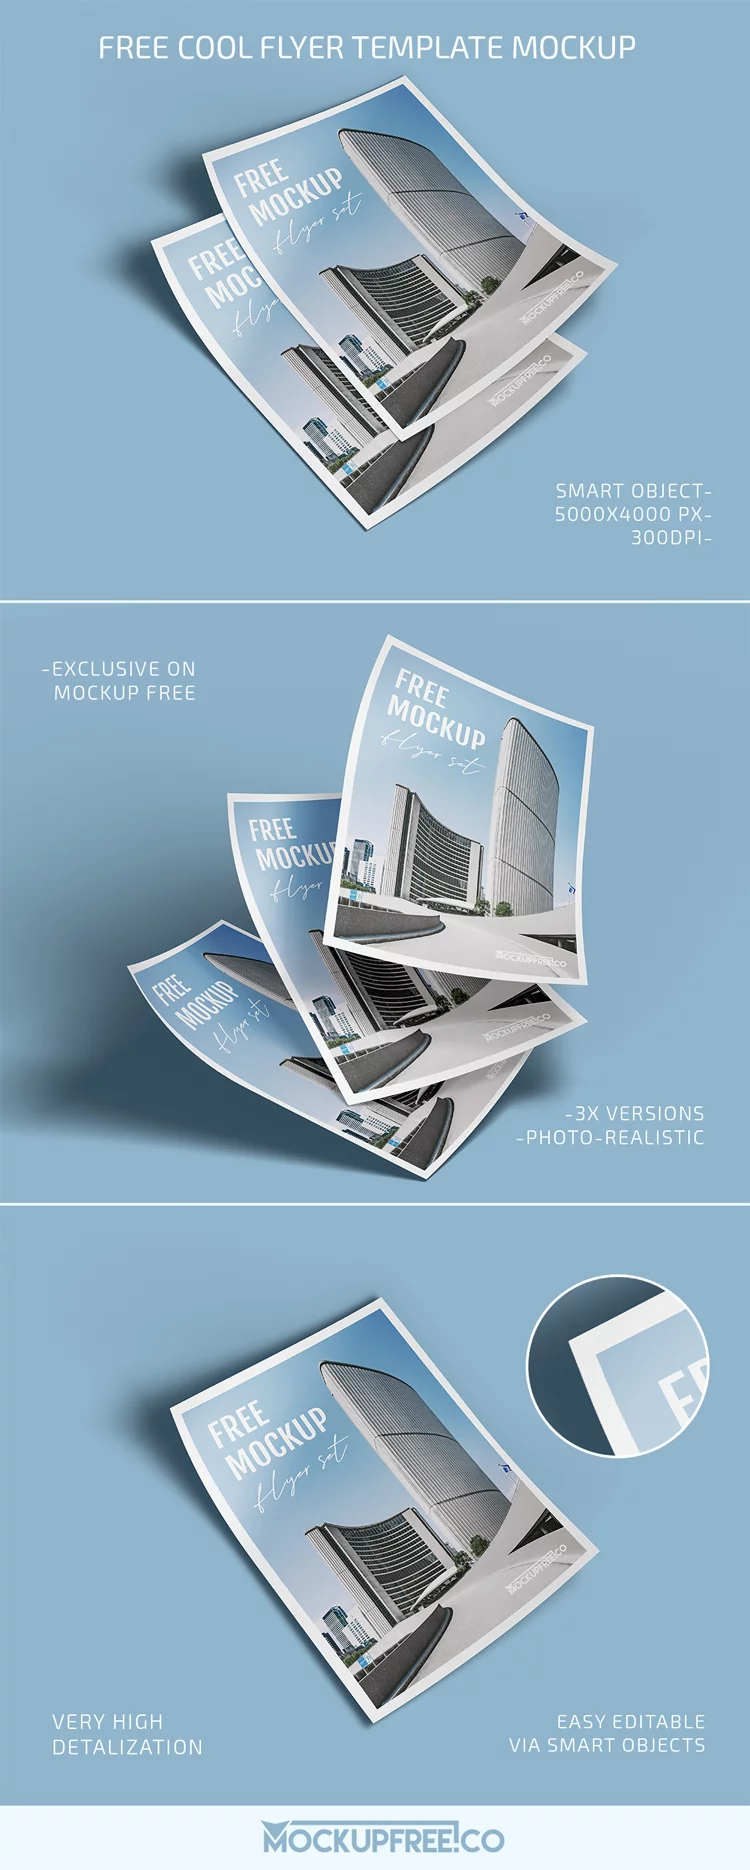 Free Cool Flyer Template PSD Mockup